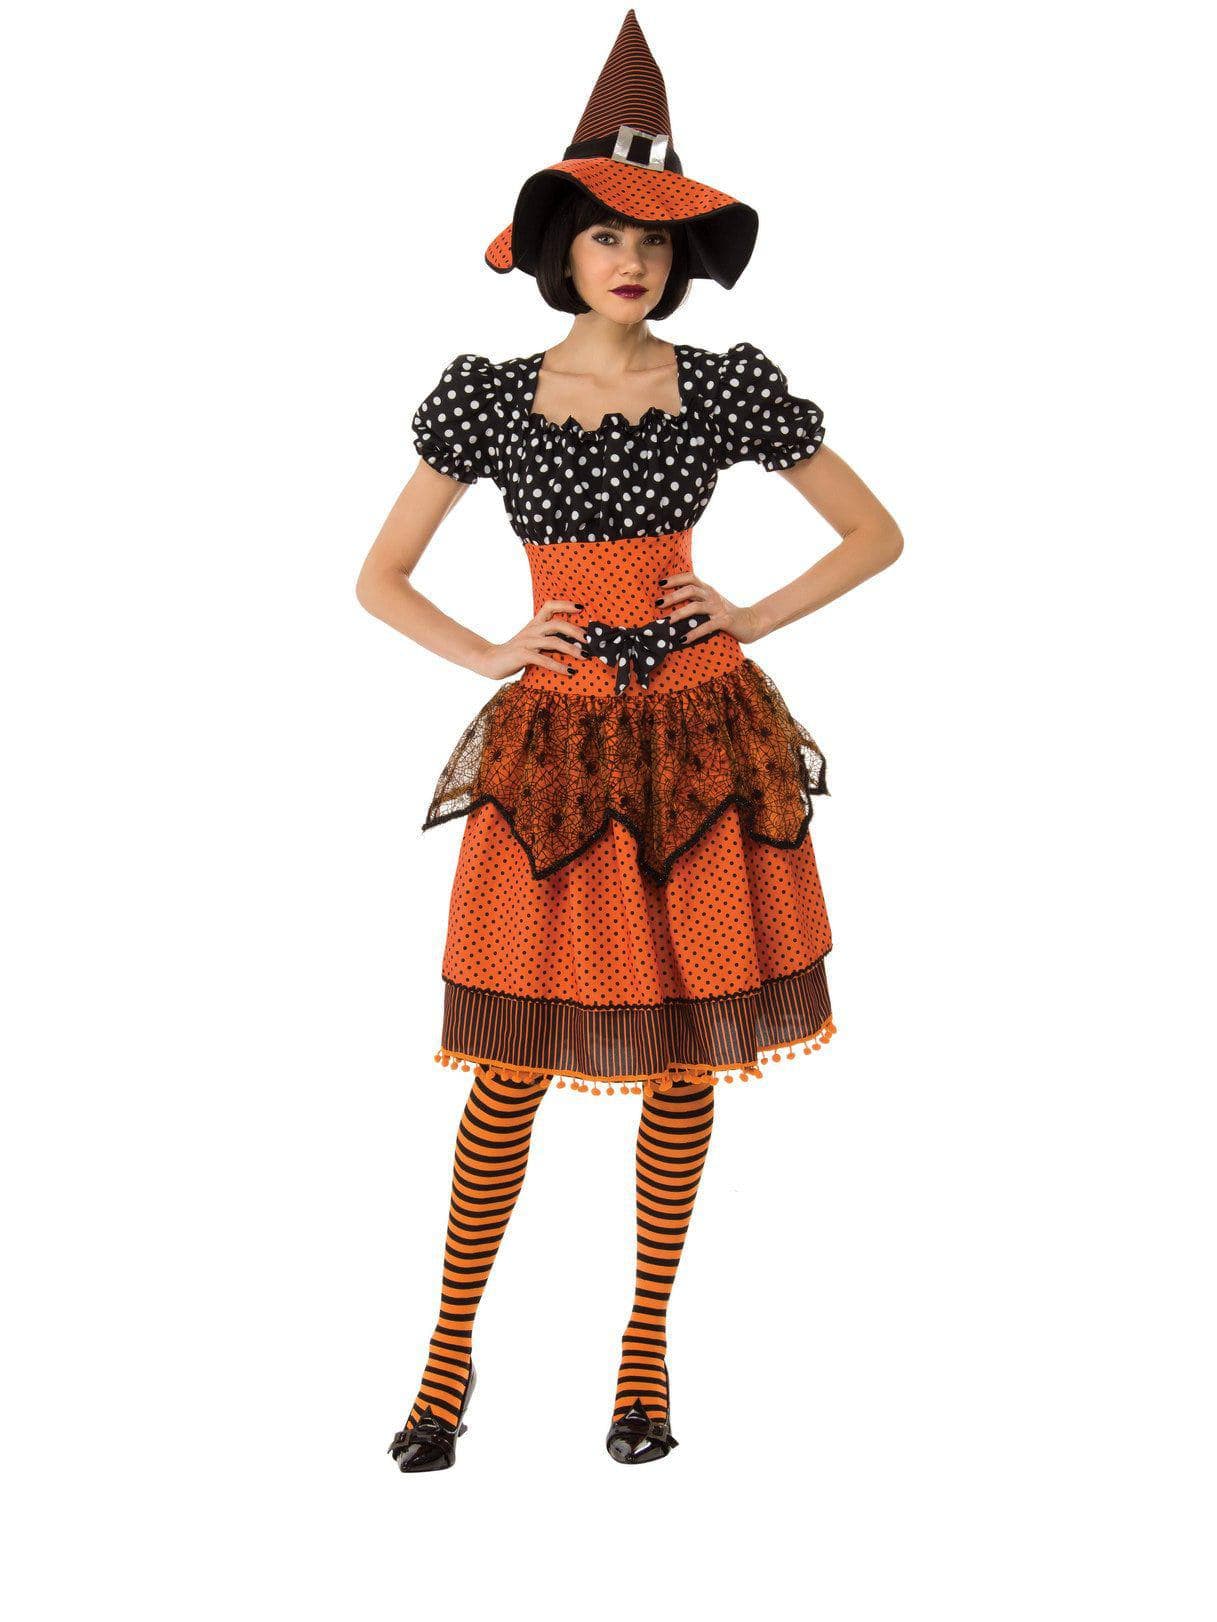 Adult Polka Dot Witch Costume - costumes.com